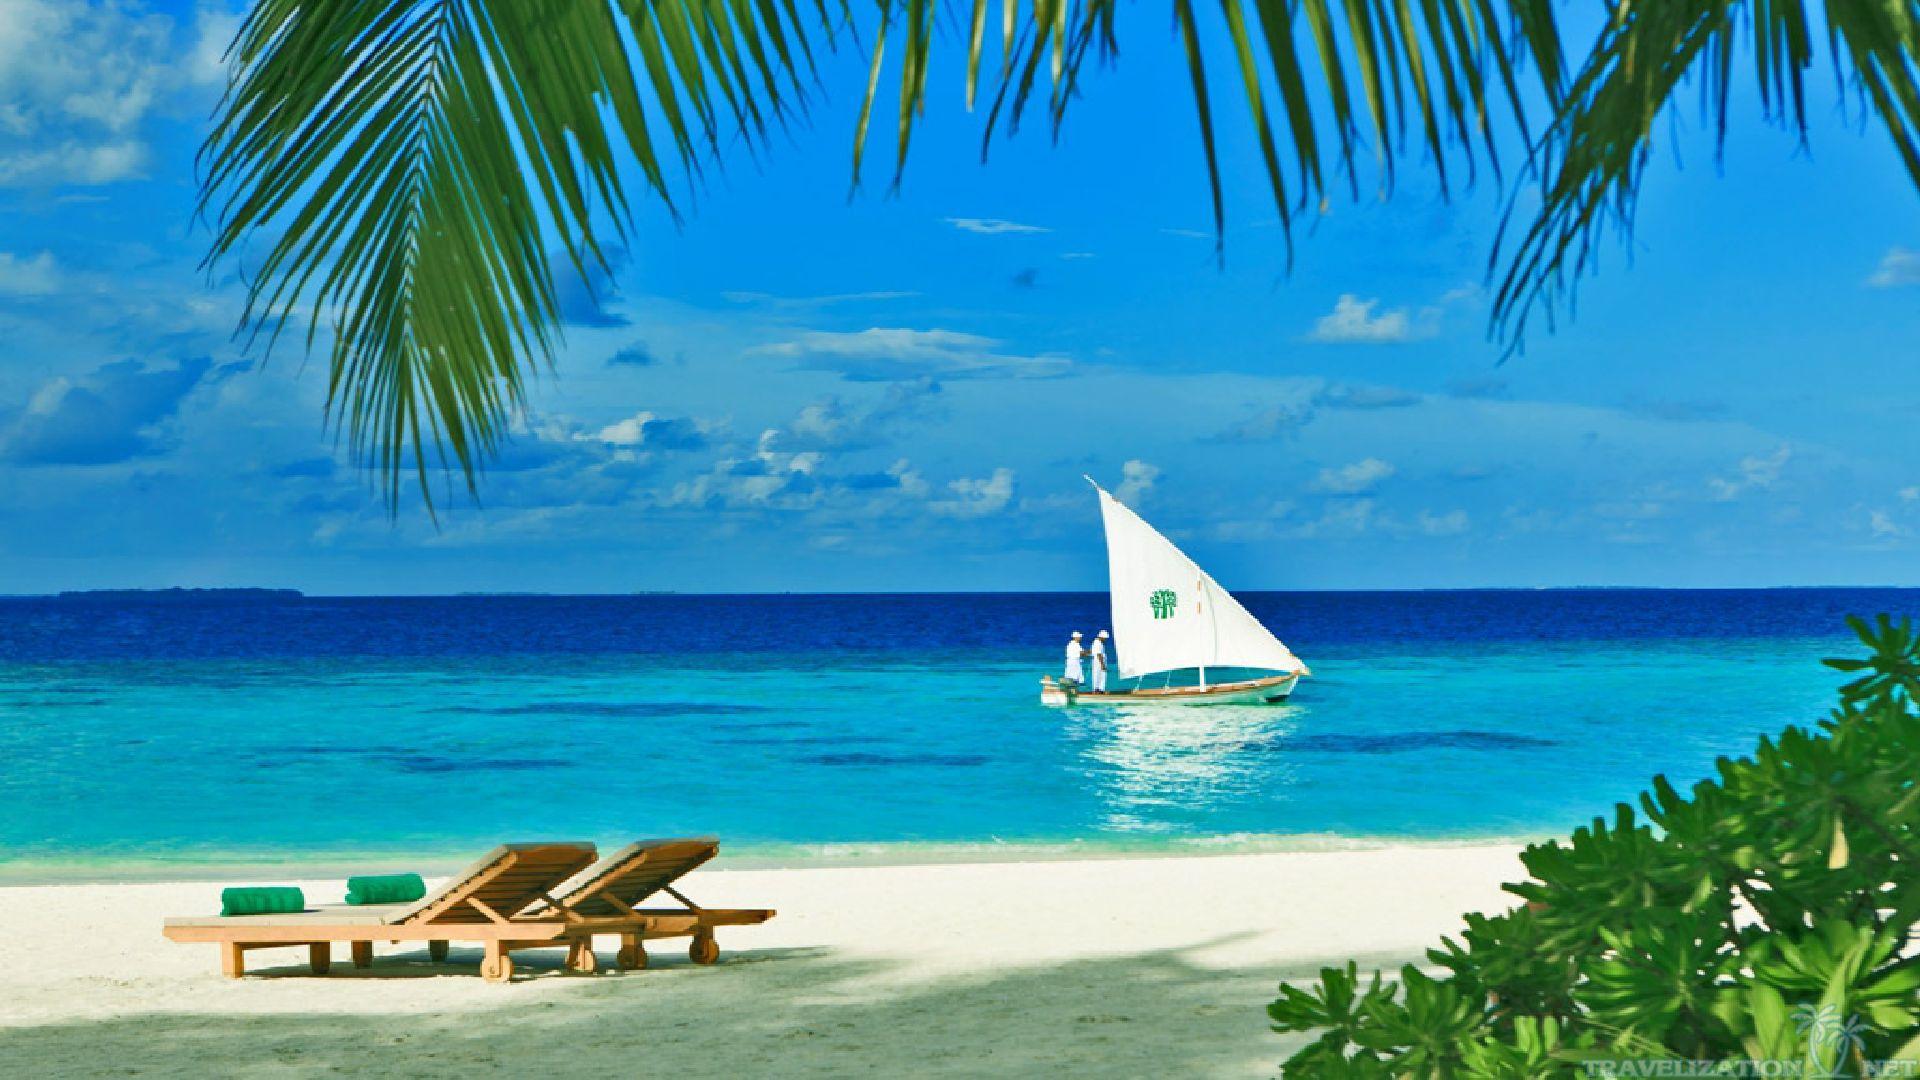 Download Best Maldives Beach Image Top Collection BsnSCB 1920x1080